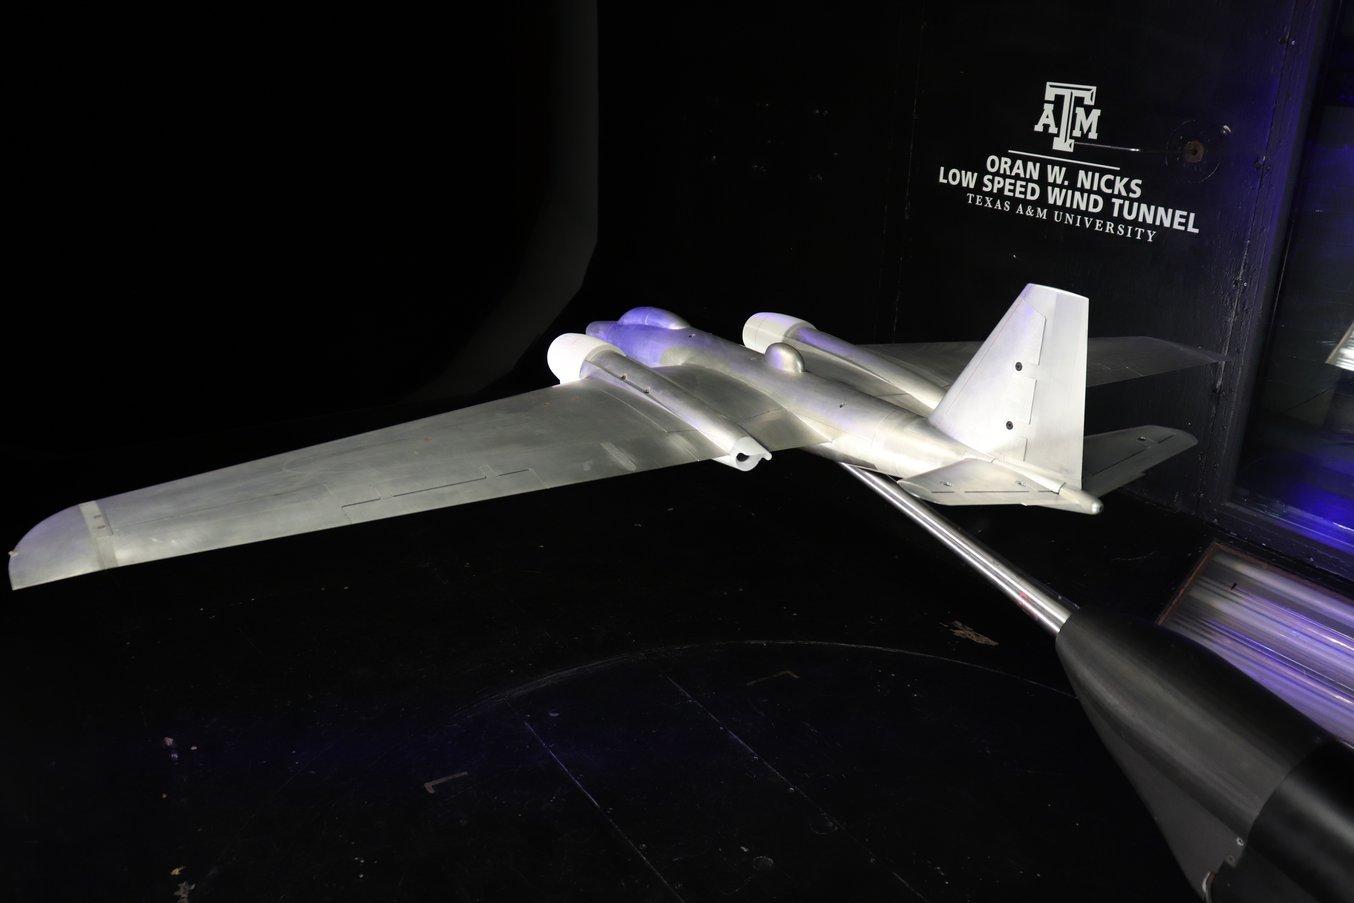 A model plane incorporating 3D prints in a wind tunnel.